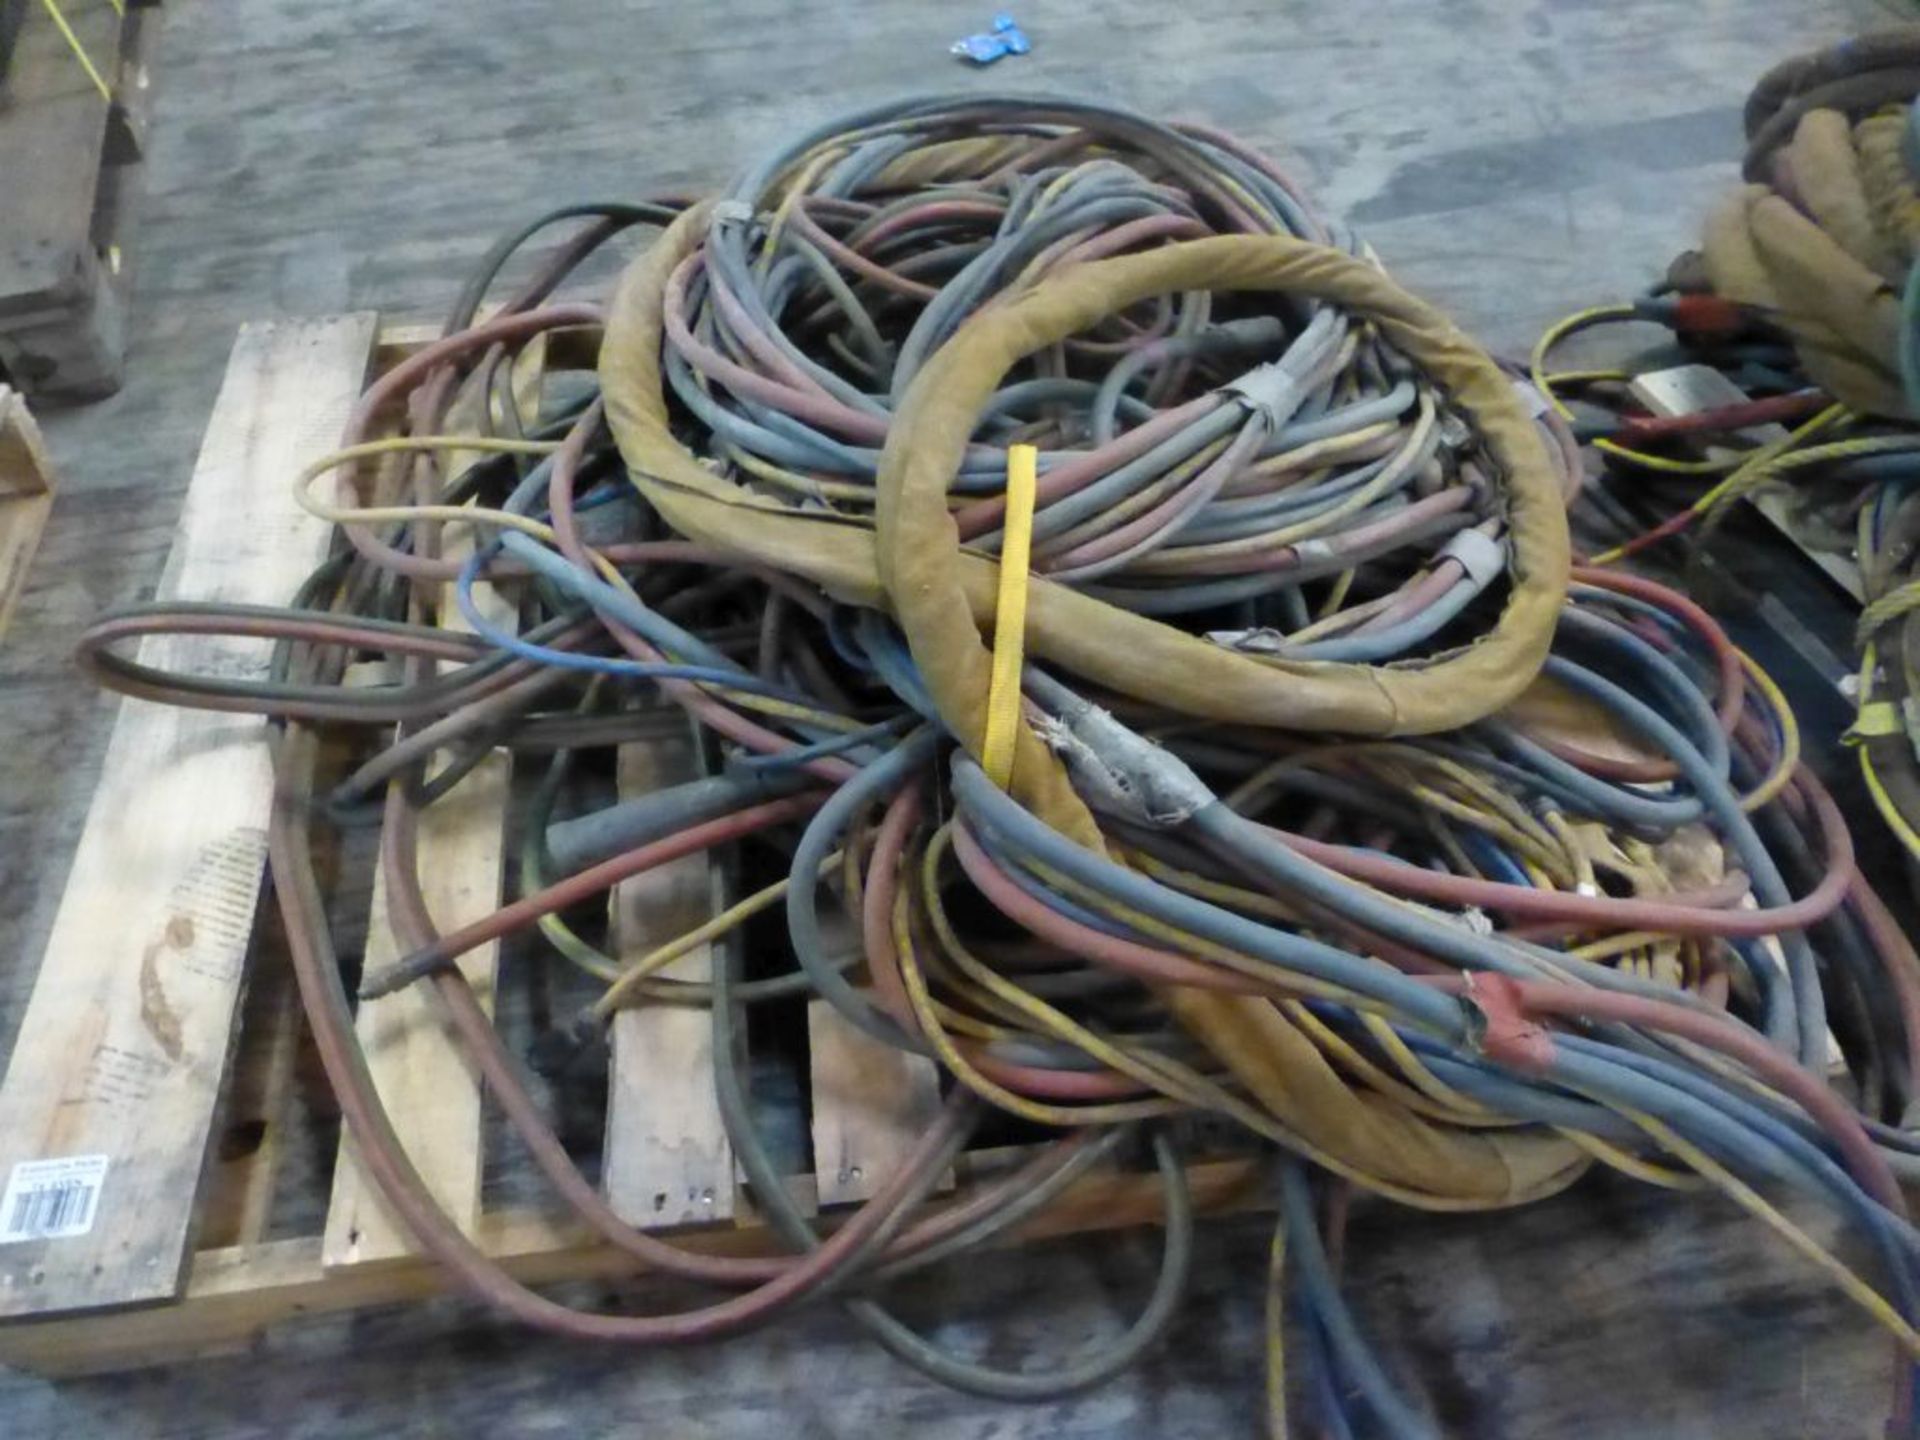 Lot of (10) 50' Welding Leads | 362 lbs; Majority are 2/0 - Image 4 of 7